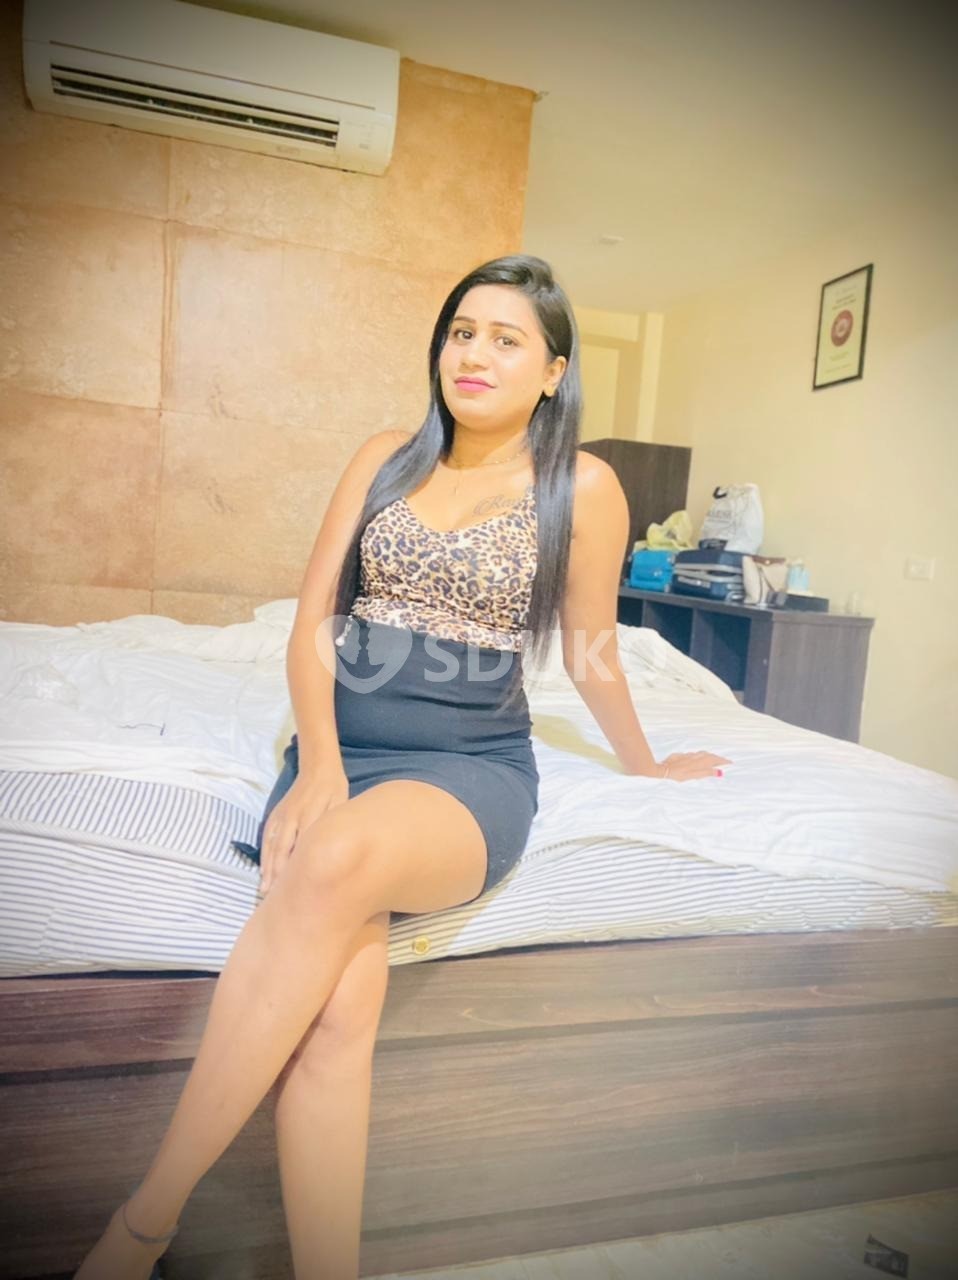 MAANSAROVAR ✨24×7 DOORSTEP INCALL ❤ OUTCALL SERVICE AVAILABLE CALL ME NOW LOW RATE PRIVATE DECENT LOCAL COLLAGE GIR